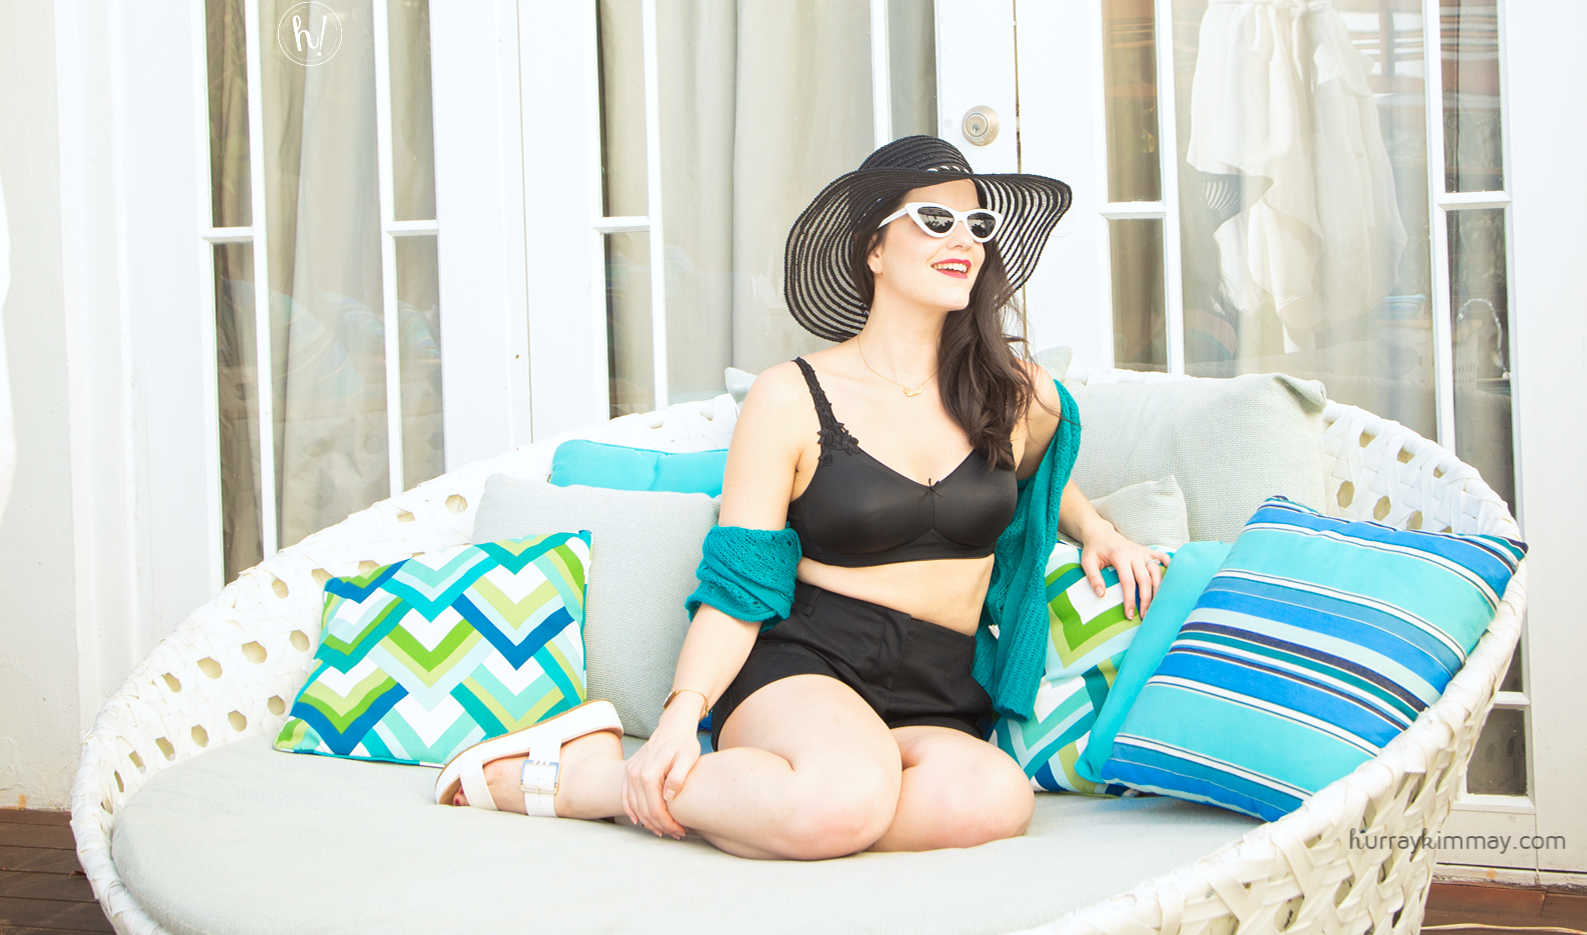 Kimmay wearing the Dominique Jillian Wire-Free Bra during the #HurrayVacay in Miami!